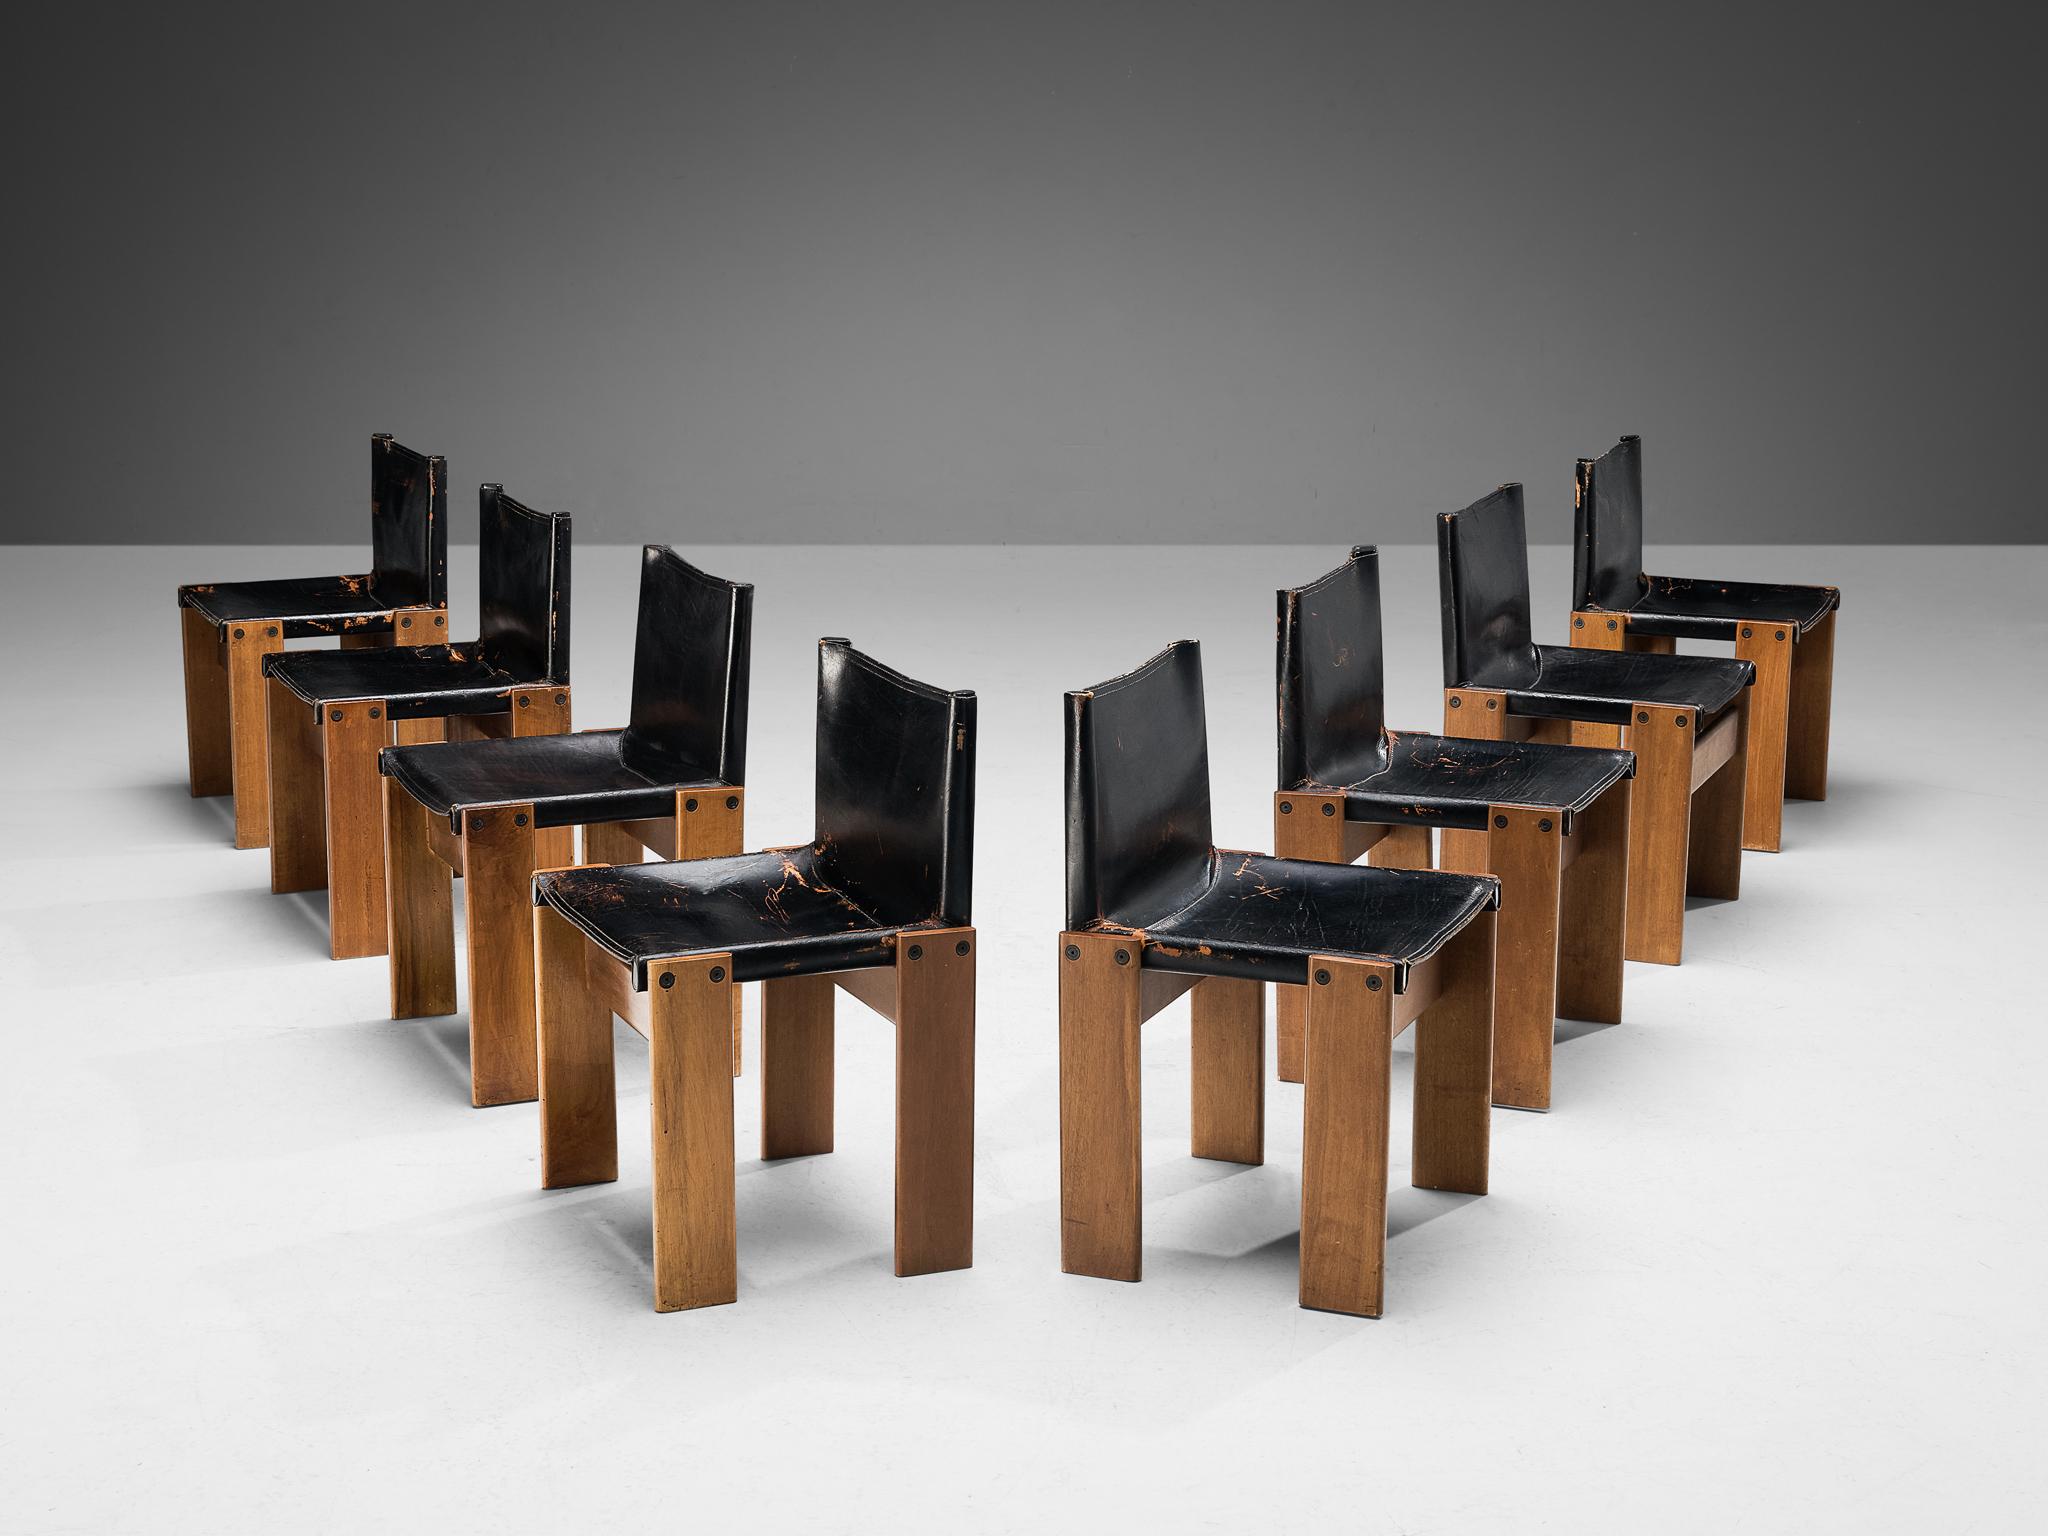 Afra & Tobia Scarpa for Molteni, 'Monk' dining chairs, walnut, leather, Italy, 1974.

Set of eight 'Monk' chairs by Italian designers Afra & Tobia Scarpa. The black leather shows beautiful patina and forms a striking combination with the walnut